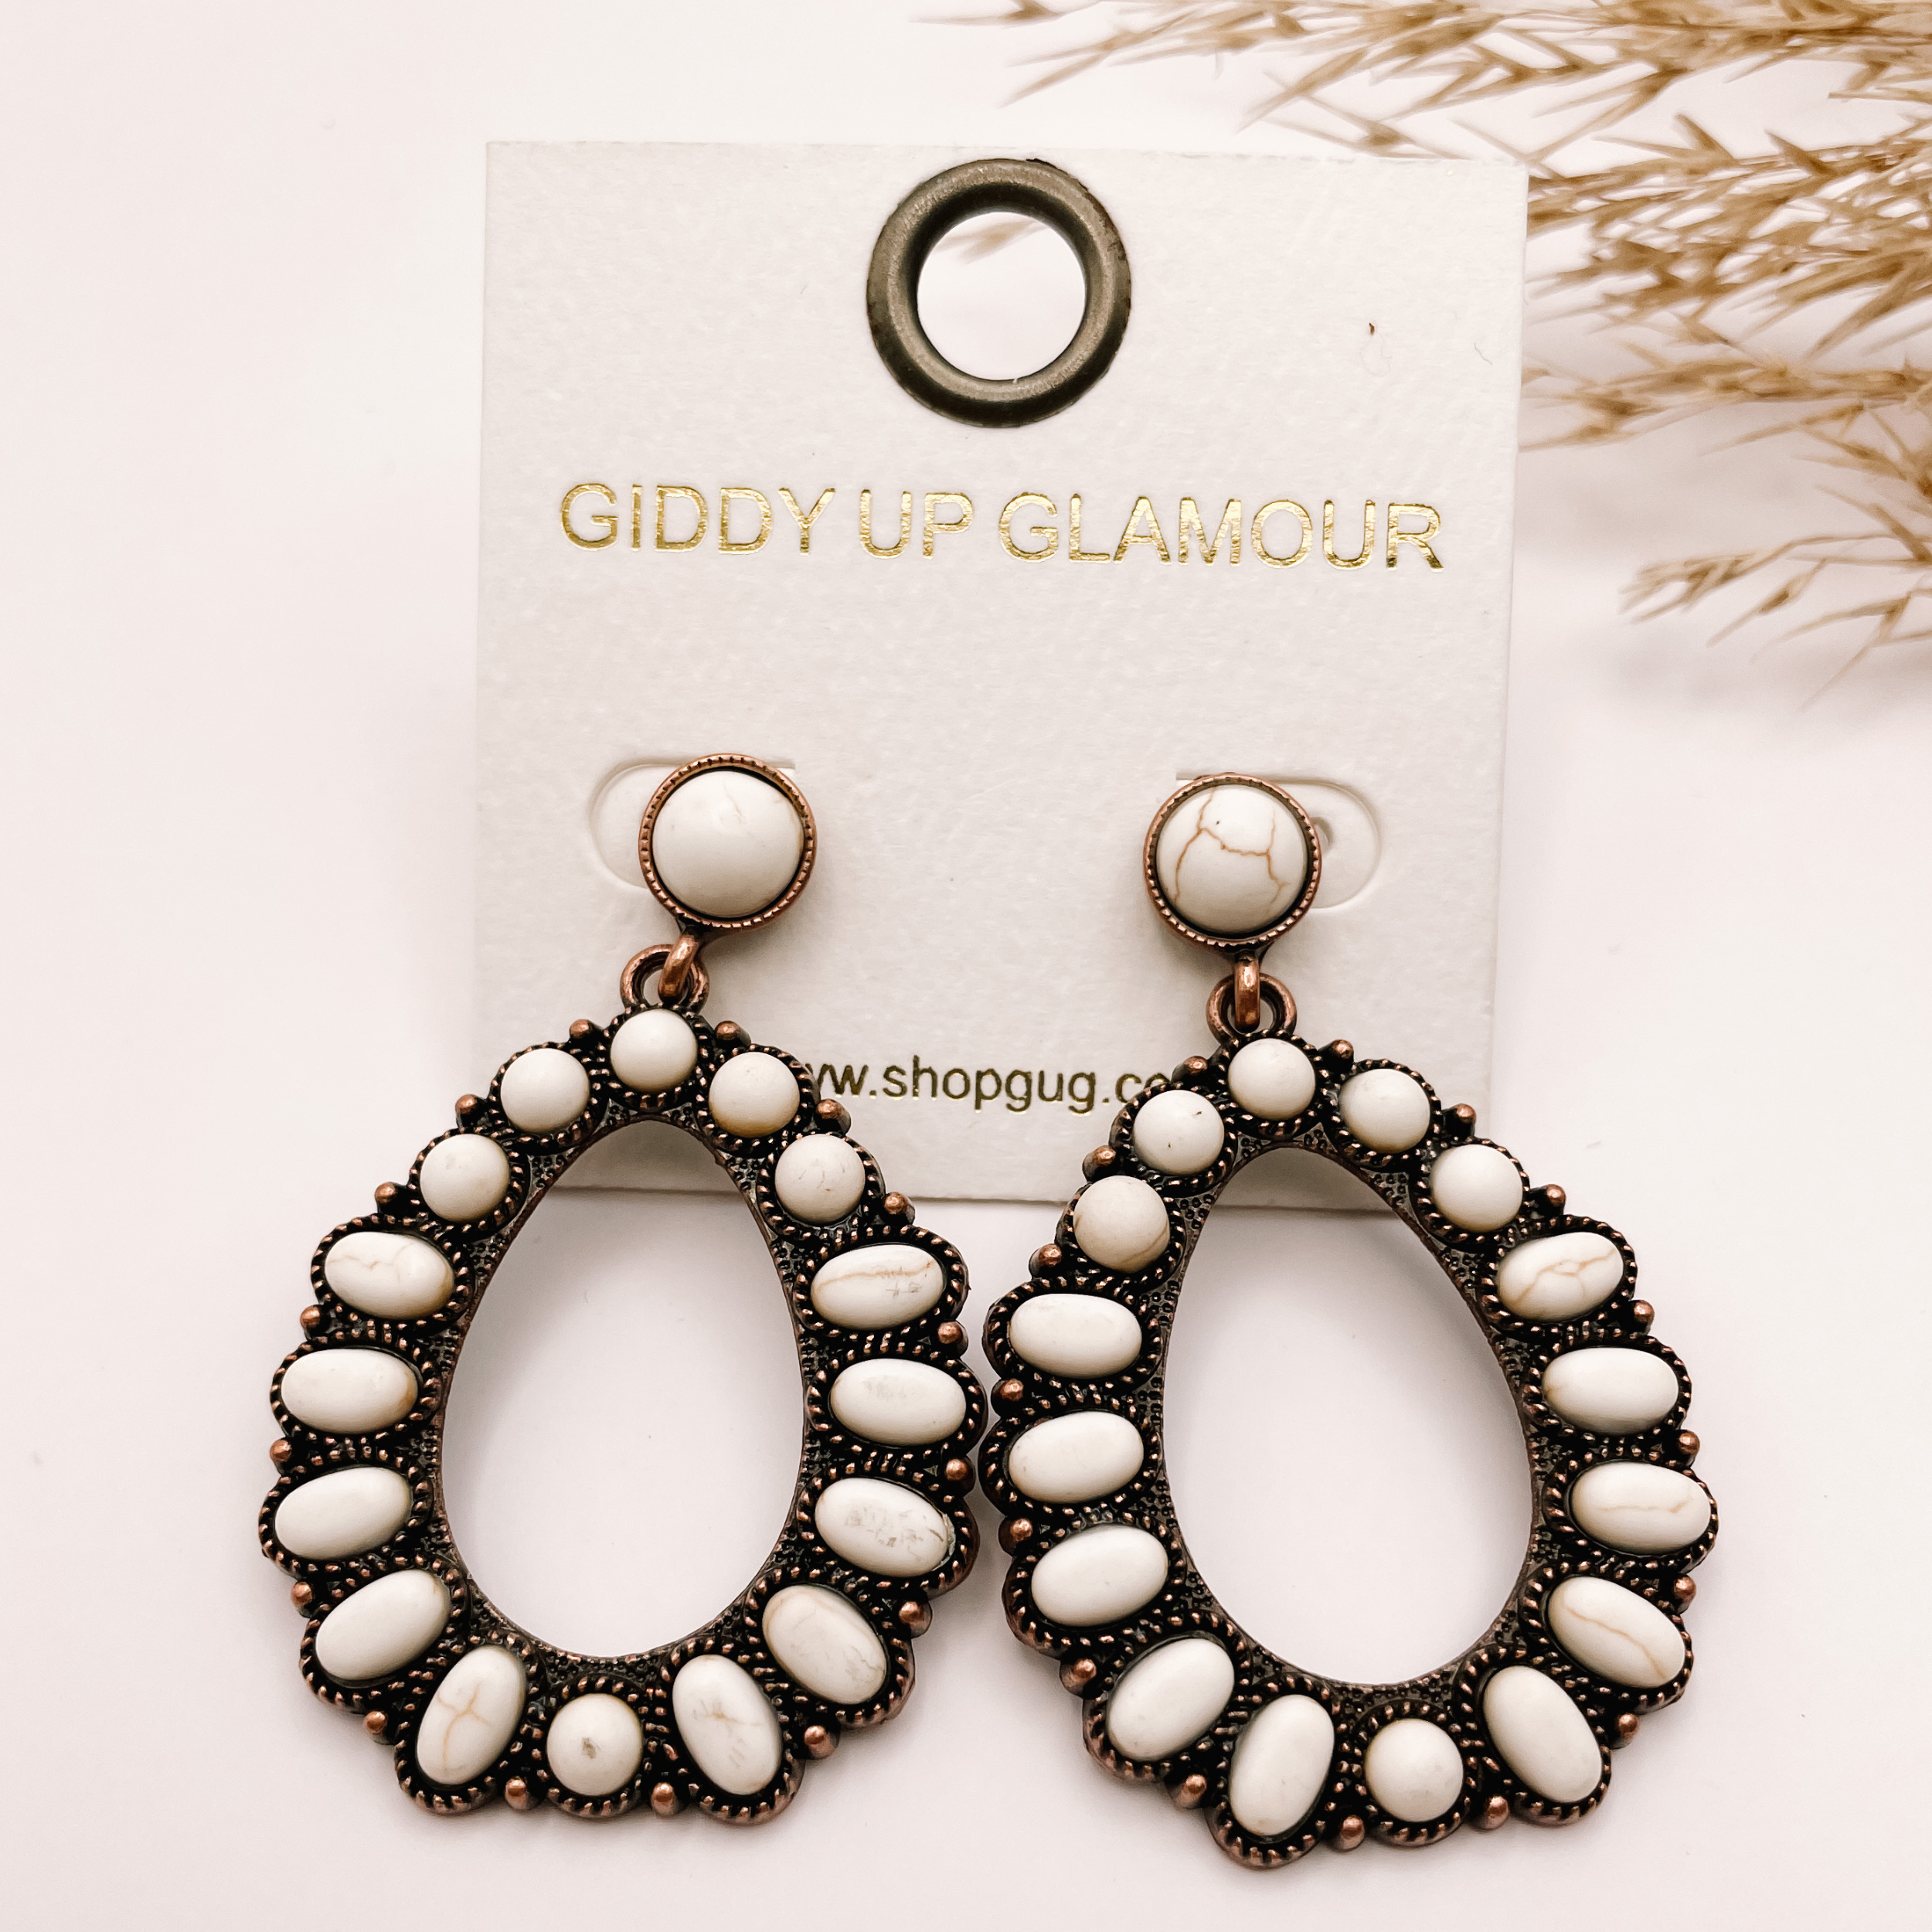 White stoned teardrop earrings, with pompous grass in the top right hand corner, on a white background.